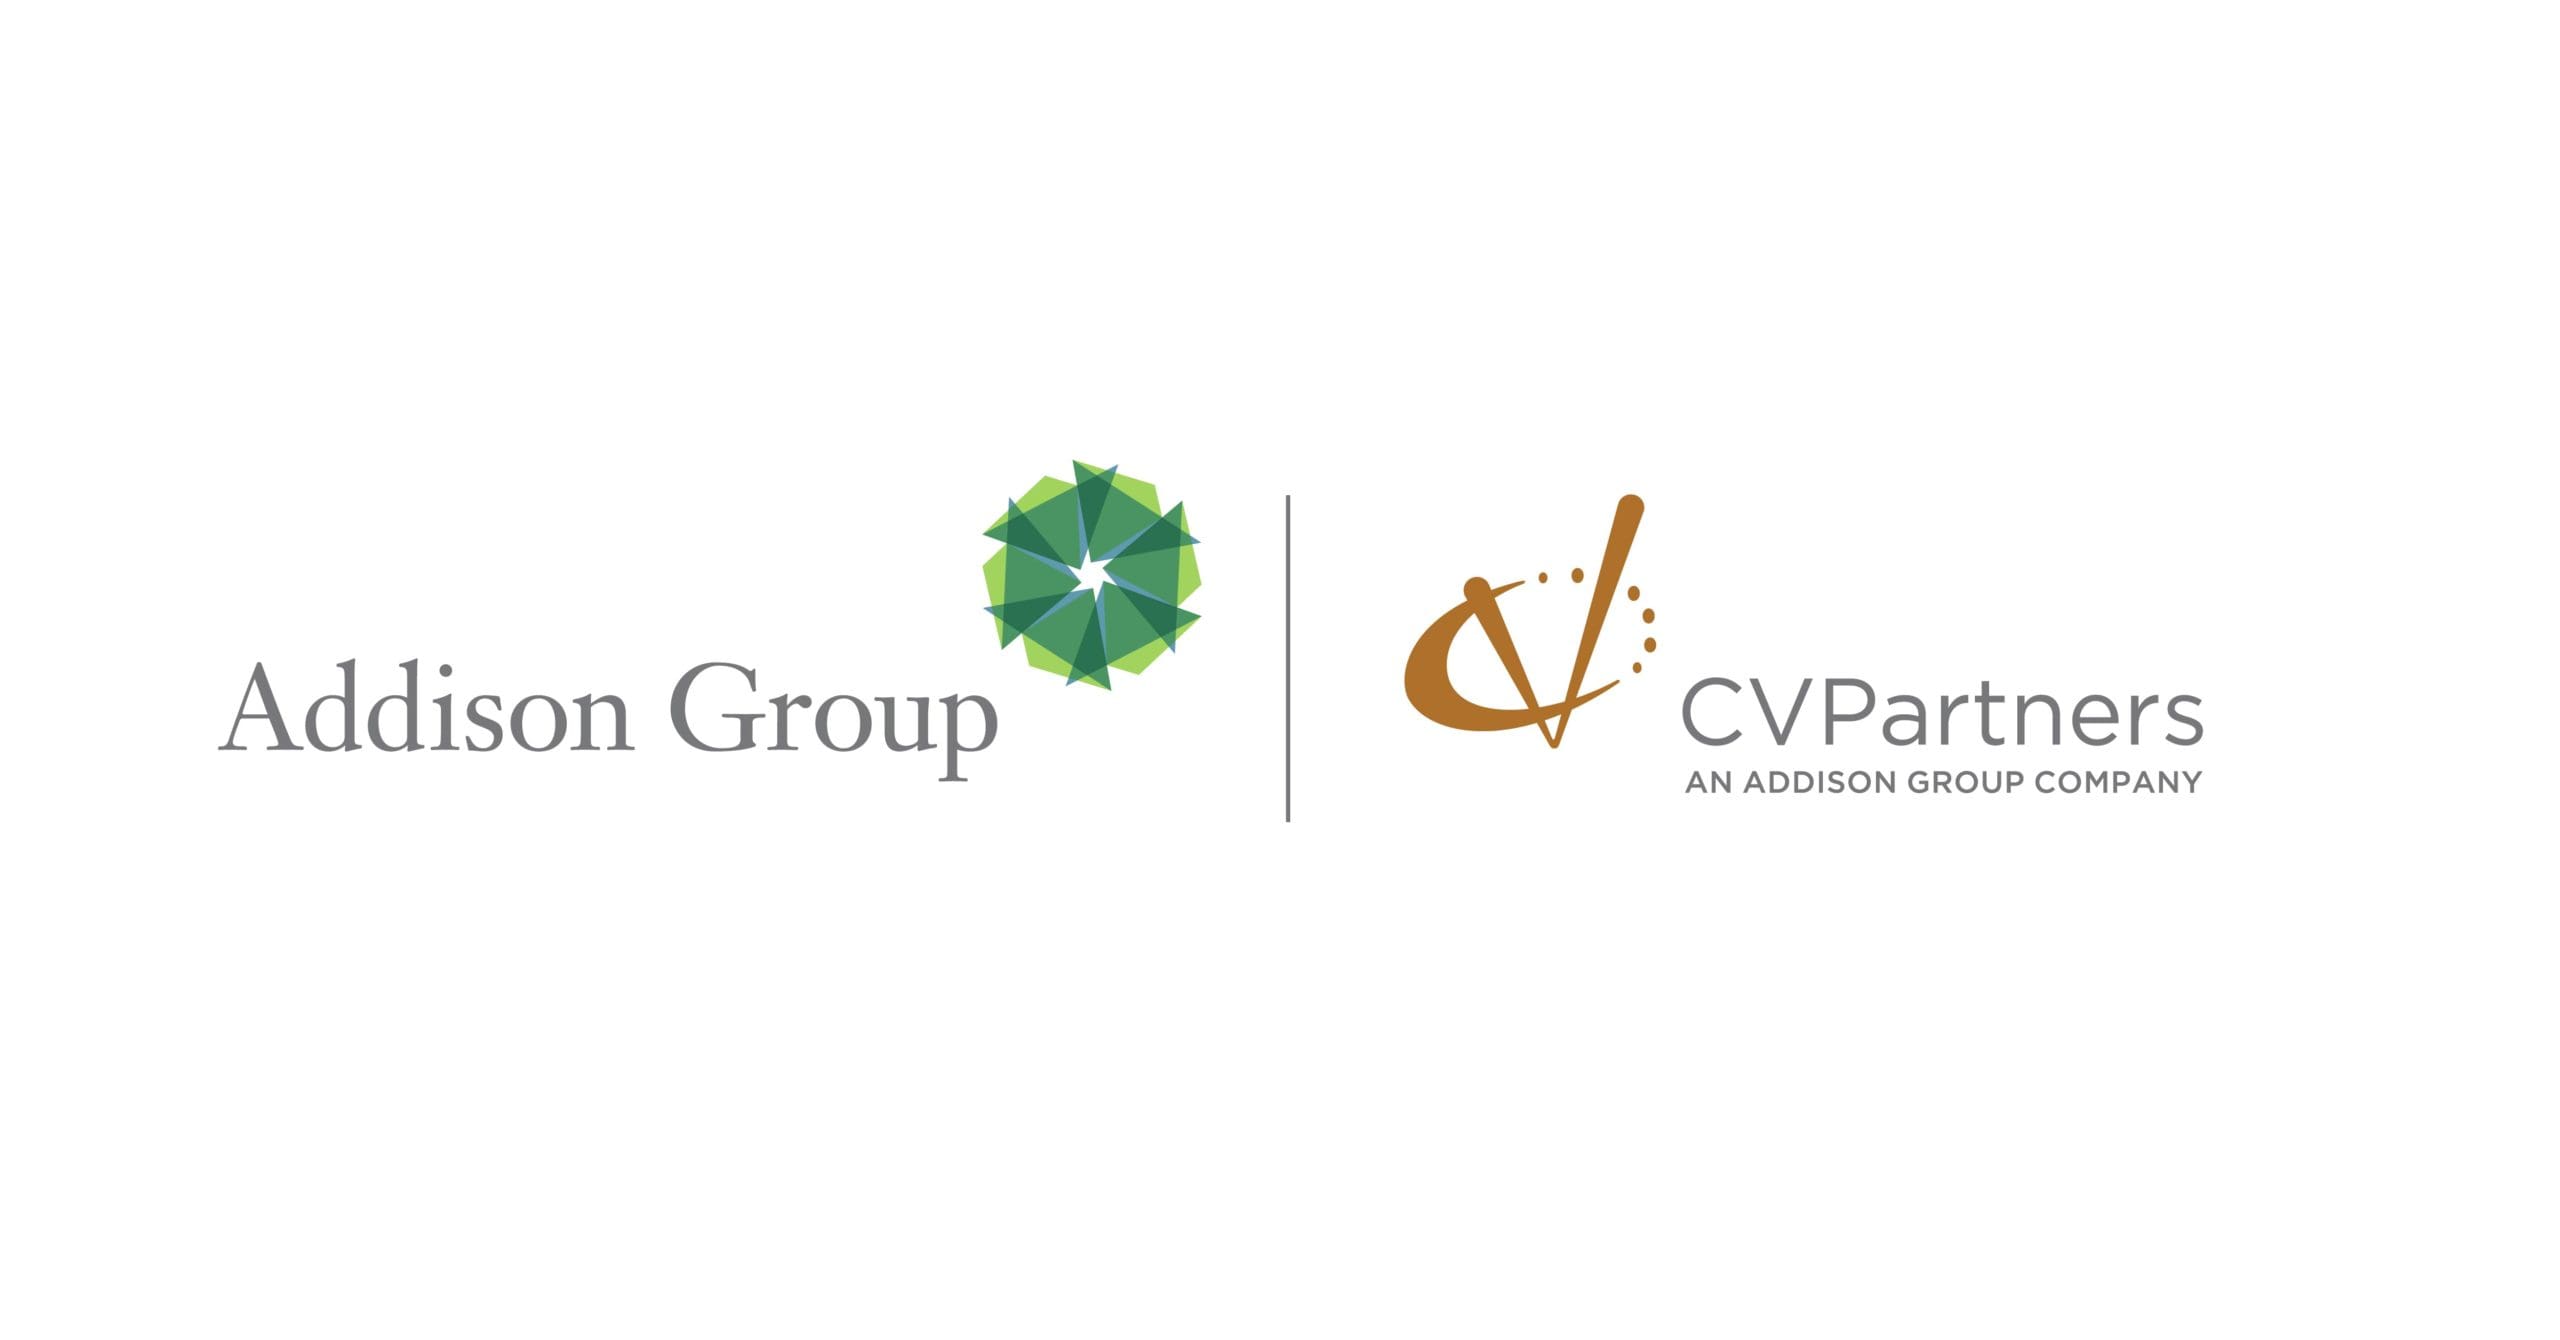 Addison Group and CVP logos next to each other